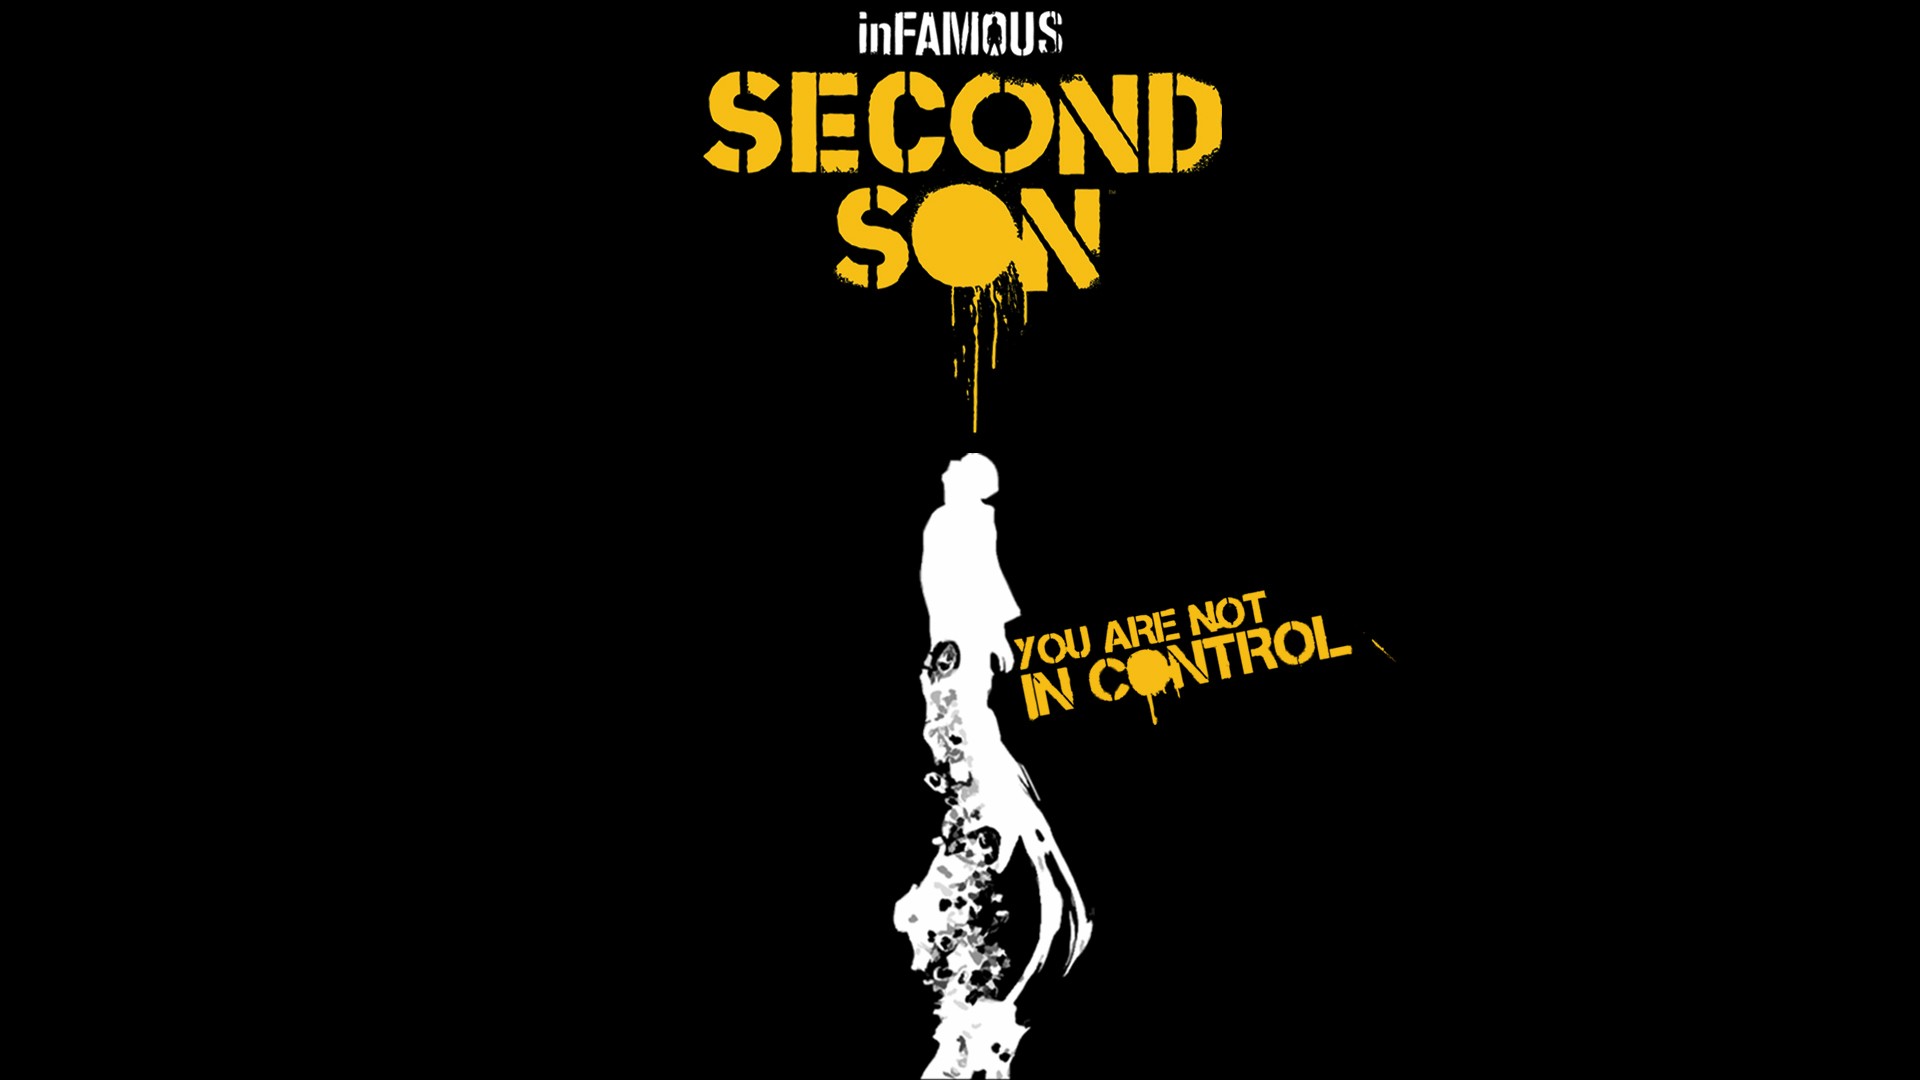 infamous second son wallpaper hd,text,font,logo,graphic design,brand